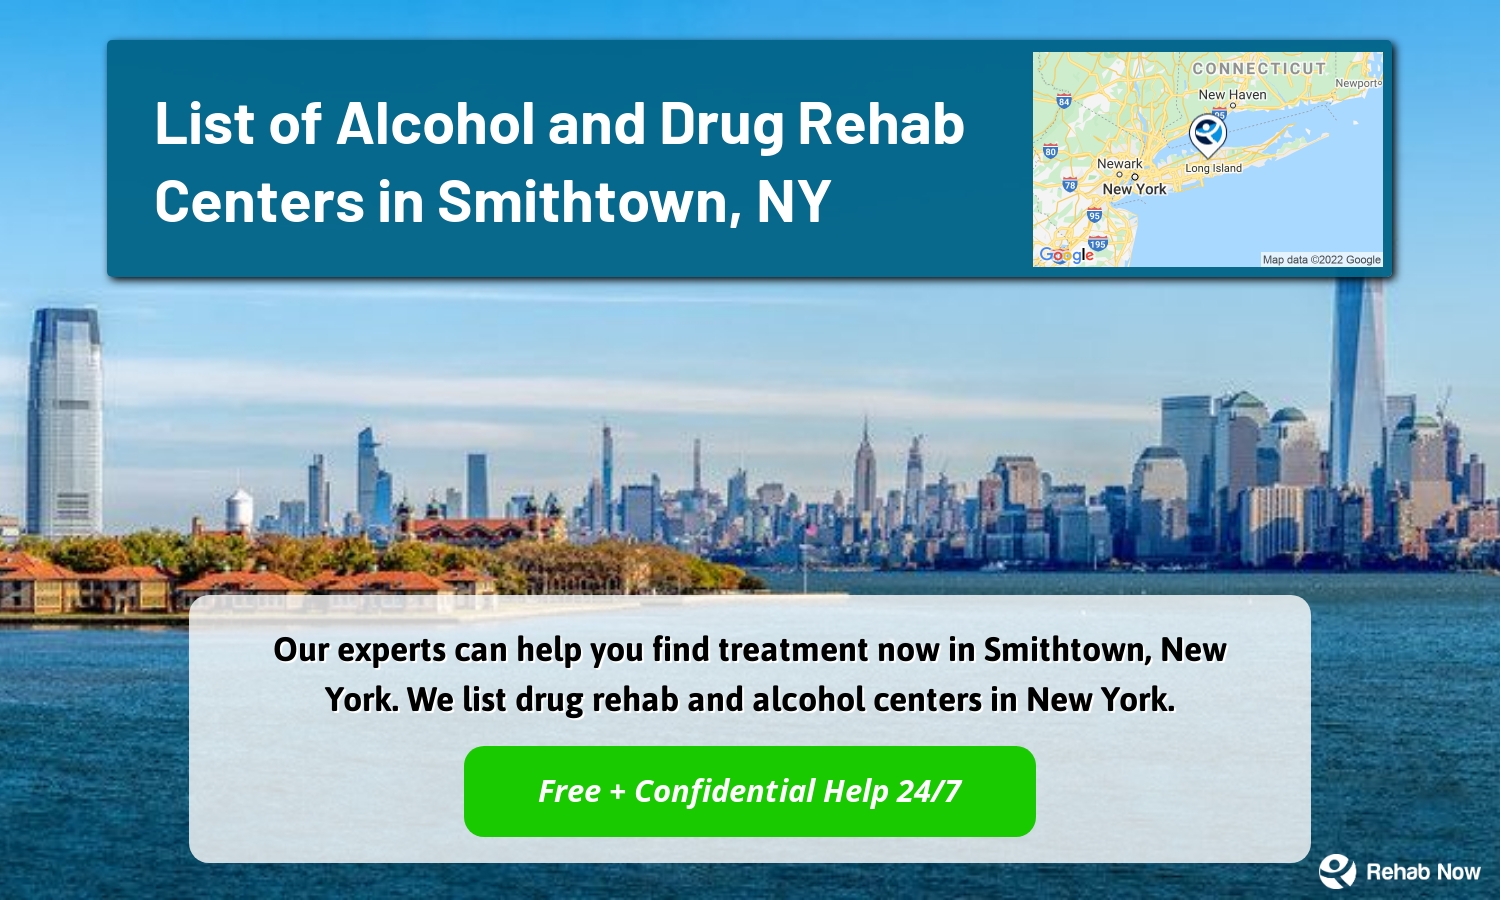 Our experts can help you find treatment now in Smithtown, New York. We list drug rehab and alcohol centers in New York.